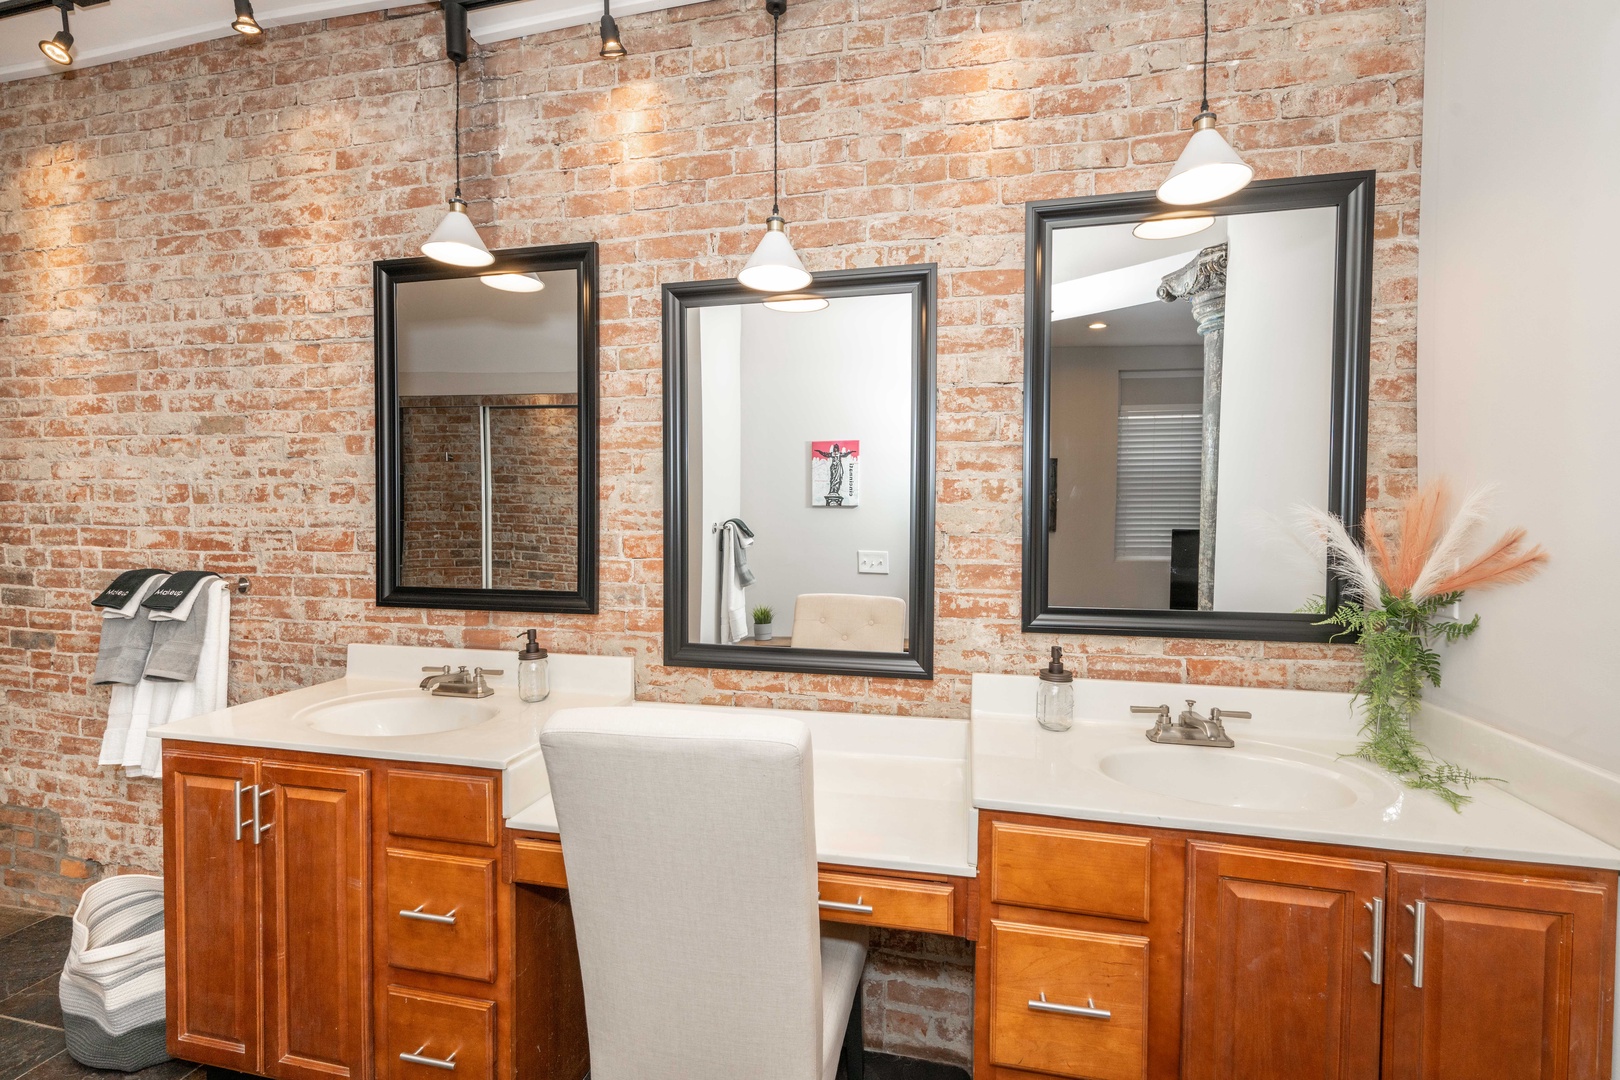 Indulge in the master bath's jetted tub, walk-in shower, & large double vanity